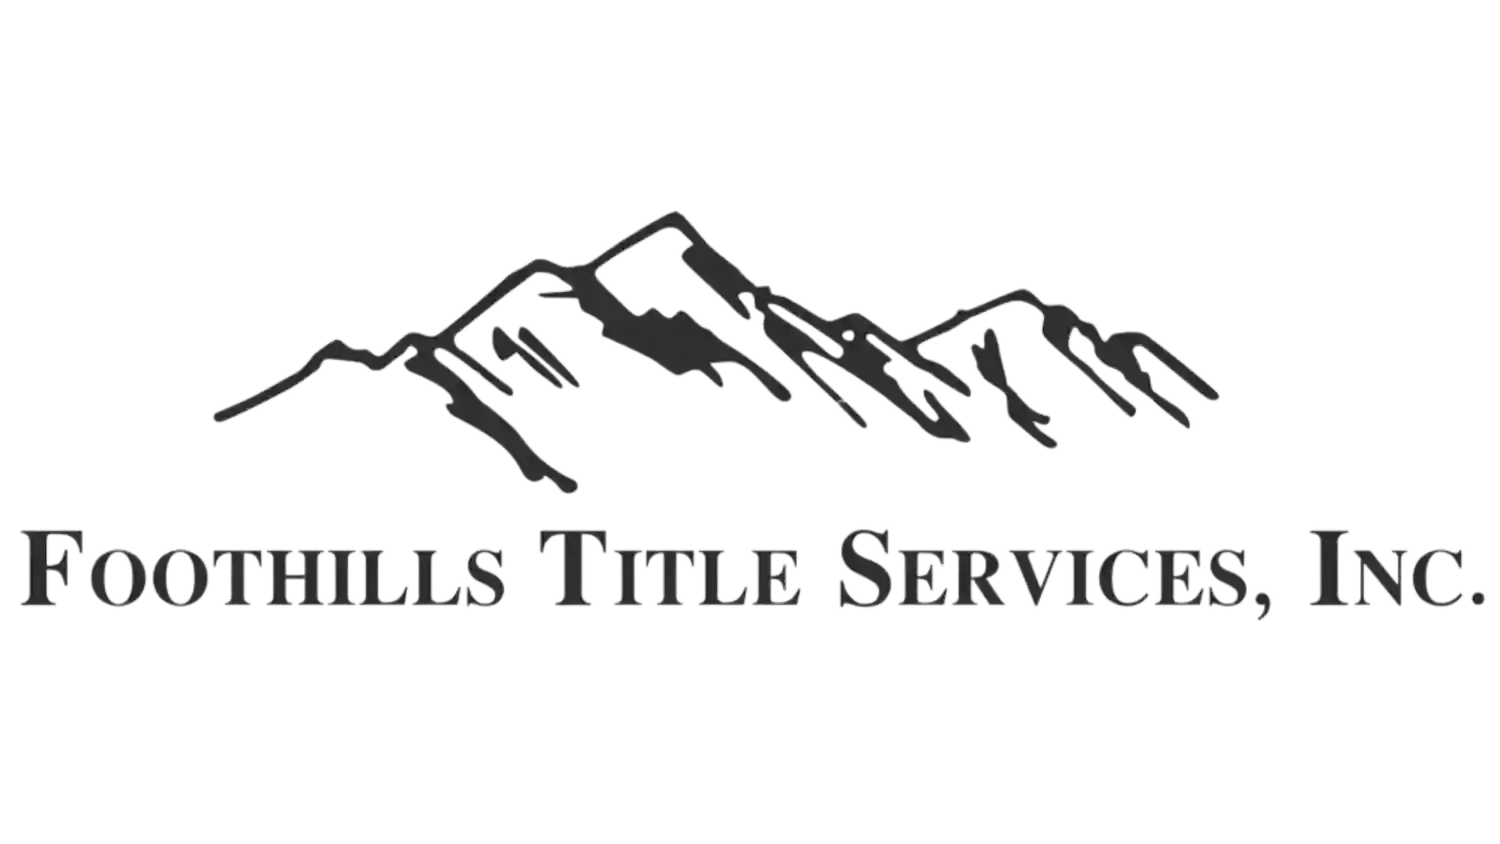 Foothills Title Services Inc.